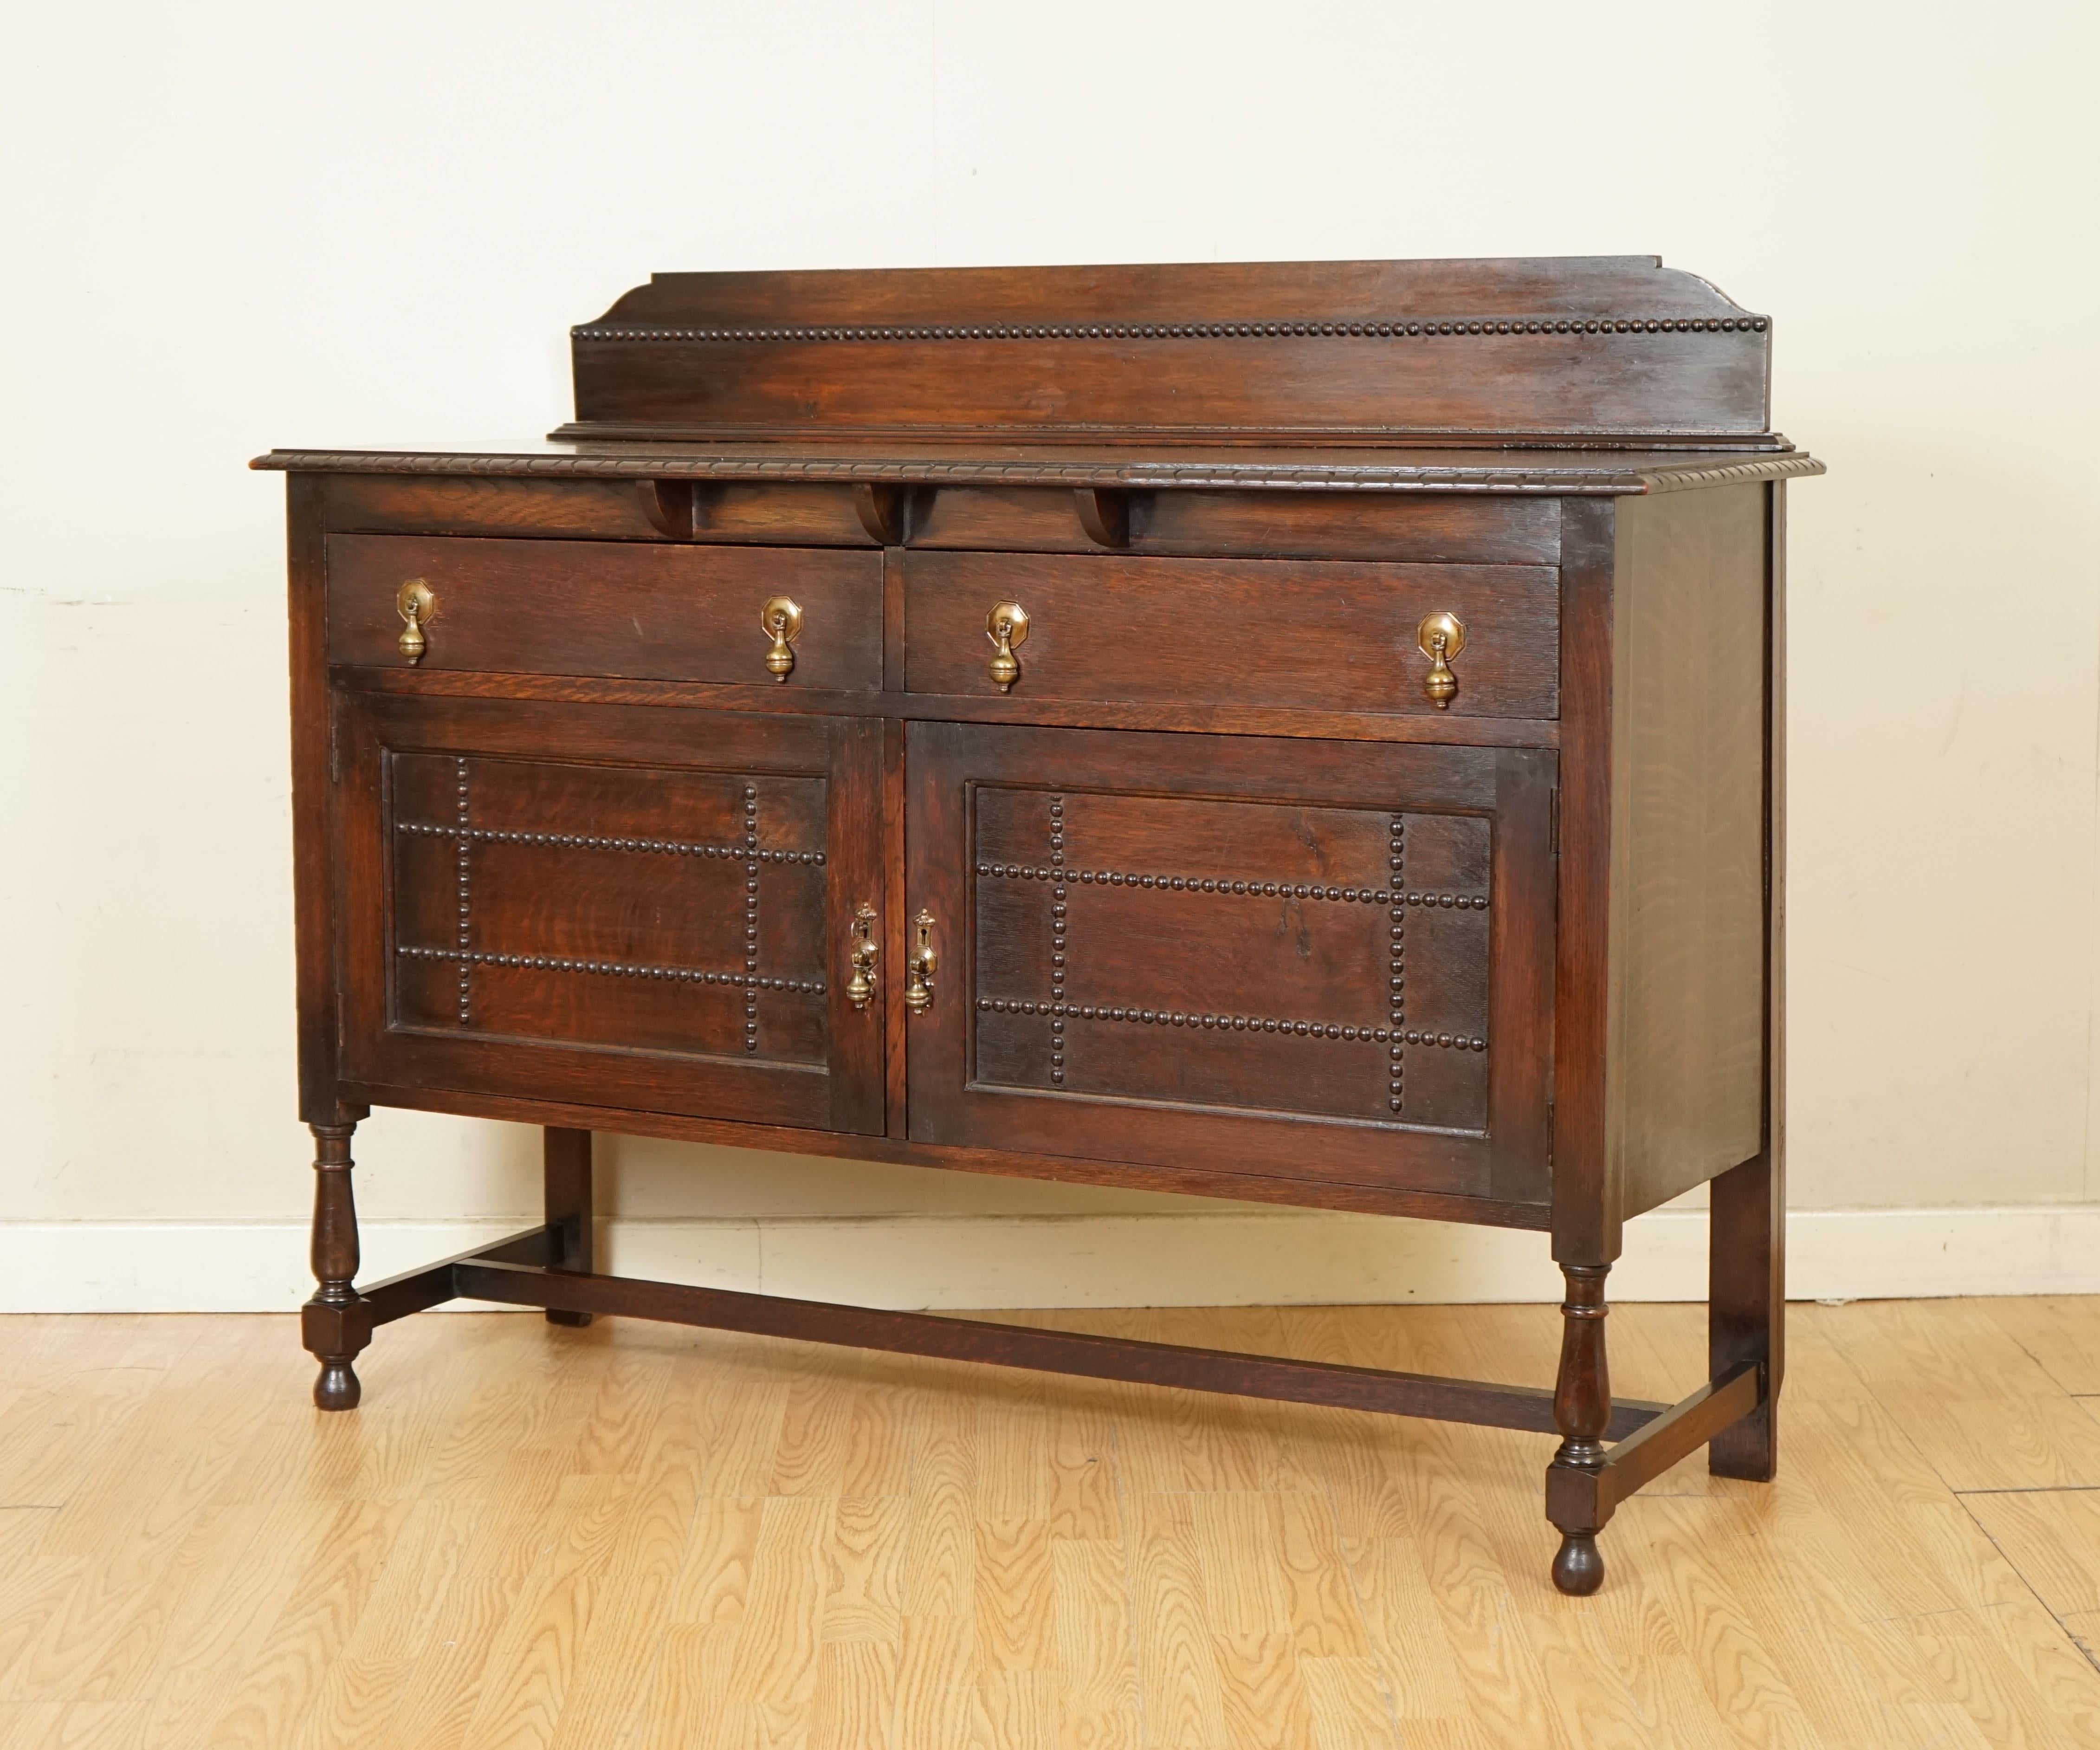 British Lovely Antique Oak Victorian Sideboard with Drawers and Doors